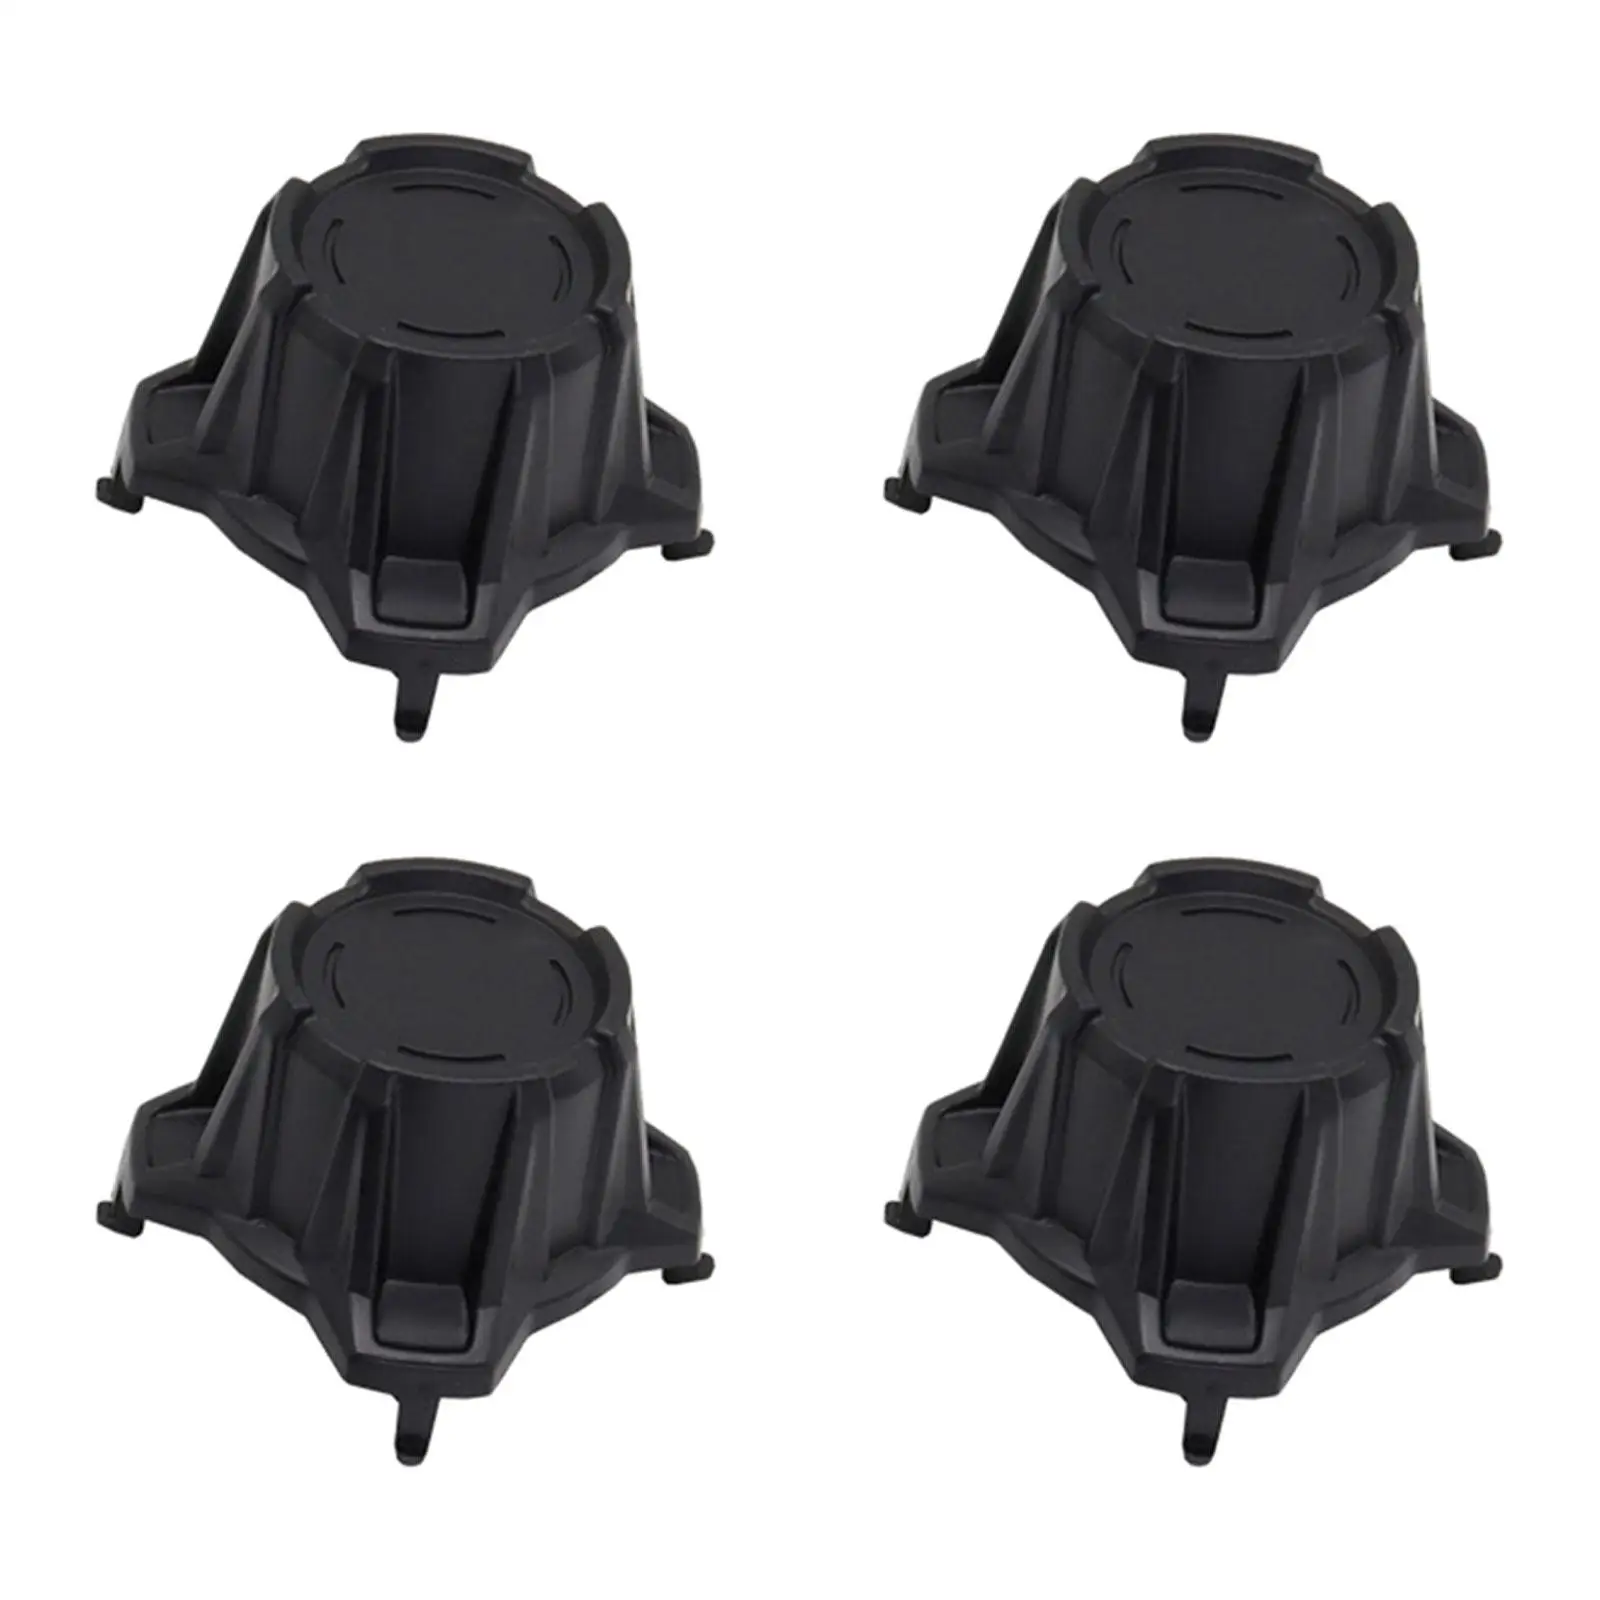 4 Pieces Tire Wheel Hub Caps Motorbike Easy Installation Cap Cover for x3 Repair Parts Replacement Professional Accessory